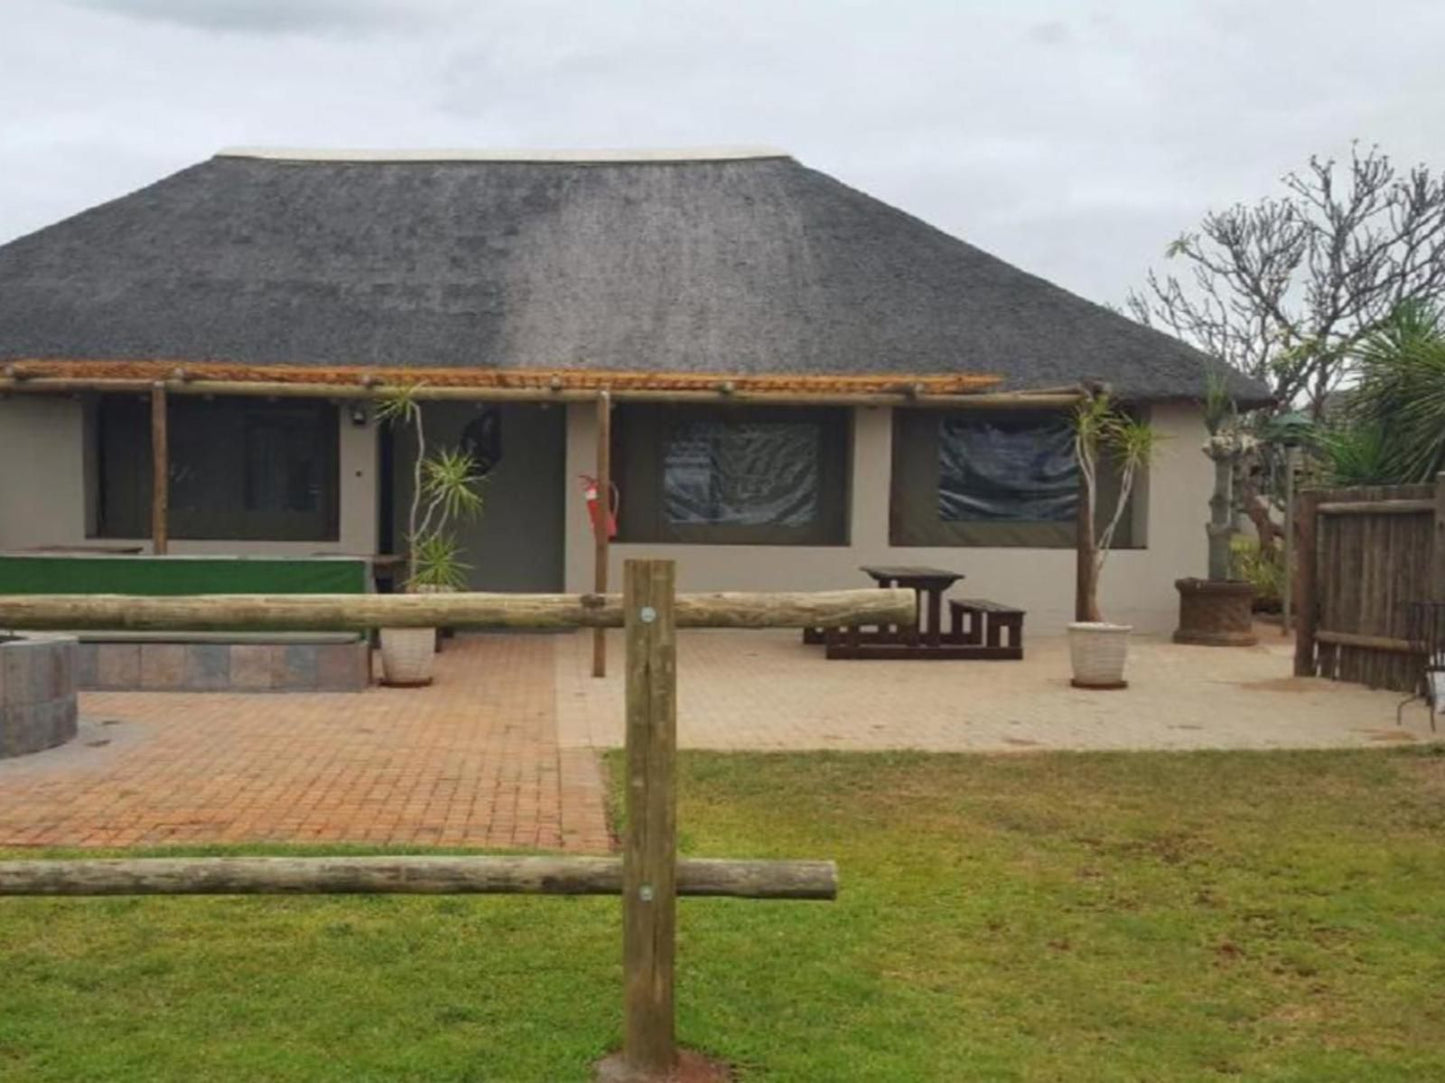 Kruger View Chalets Malelane Mpumalanga South Africa House, Building, Architecture